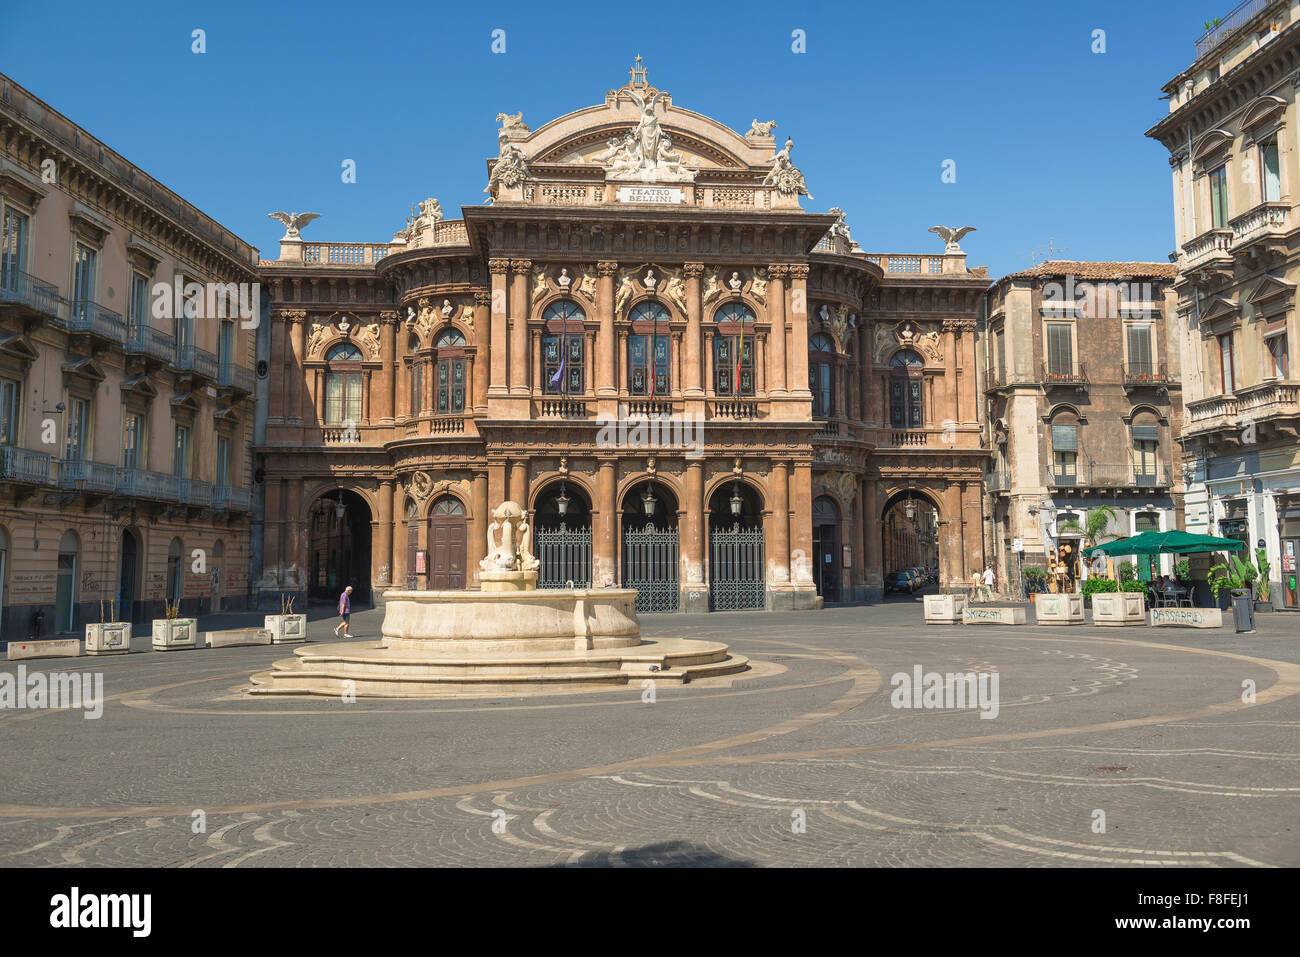 Piazza Bellini, view of the historic Catania opera house - the Teatro Bellini -  with the Piazza Bellini in the foreground, Catania, Sicily. Stock Photo